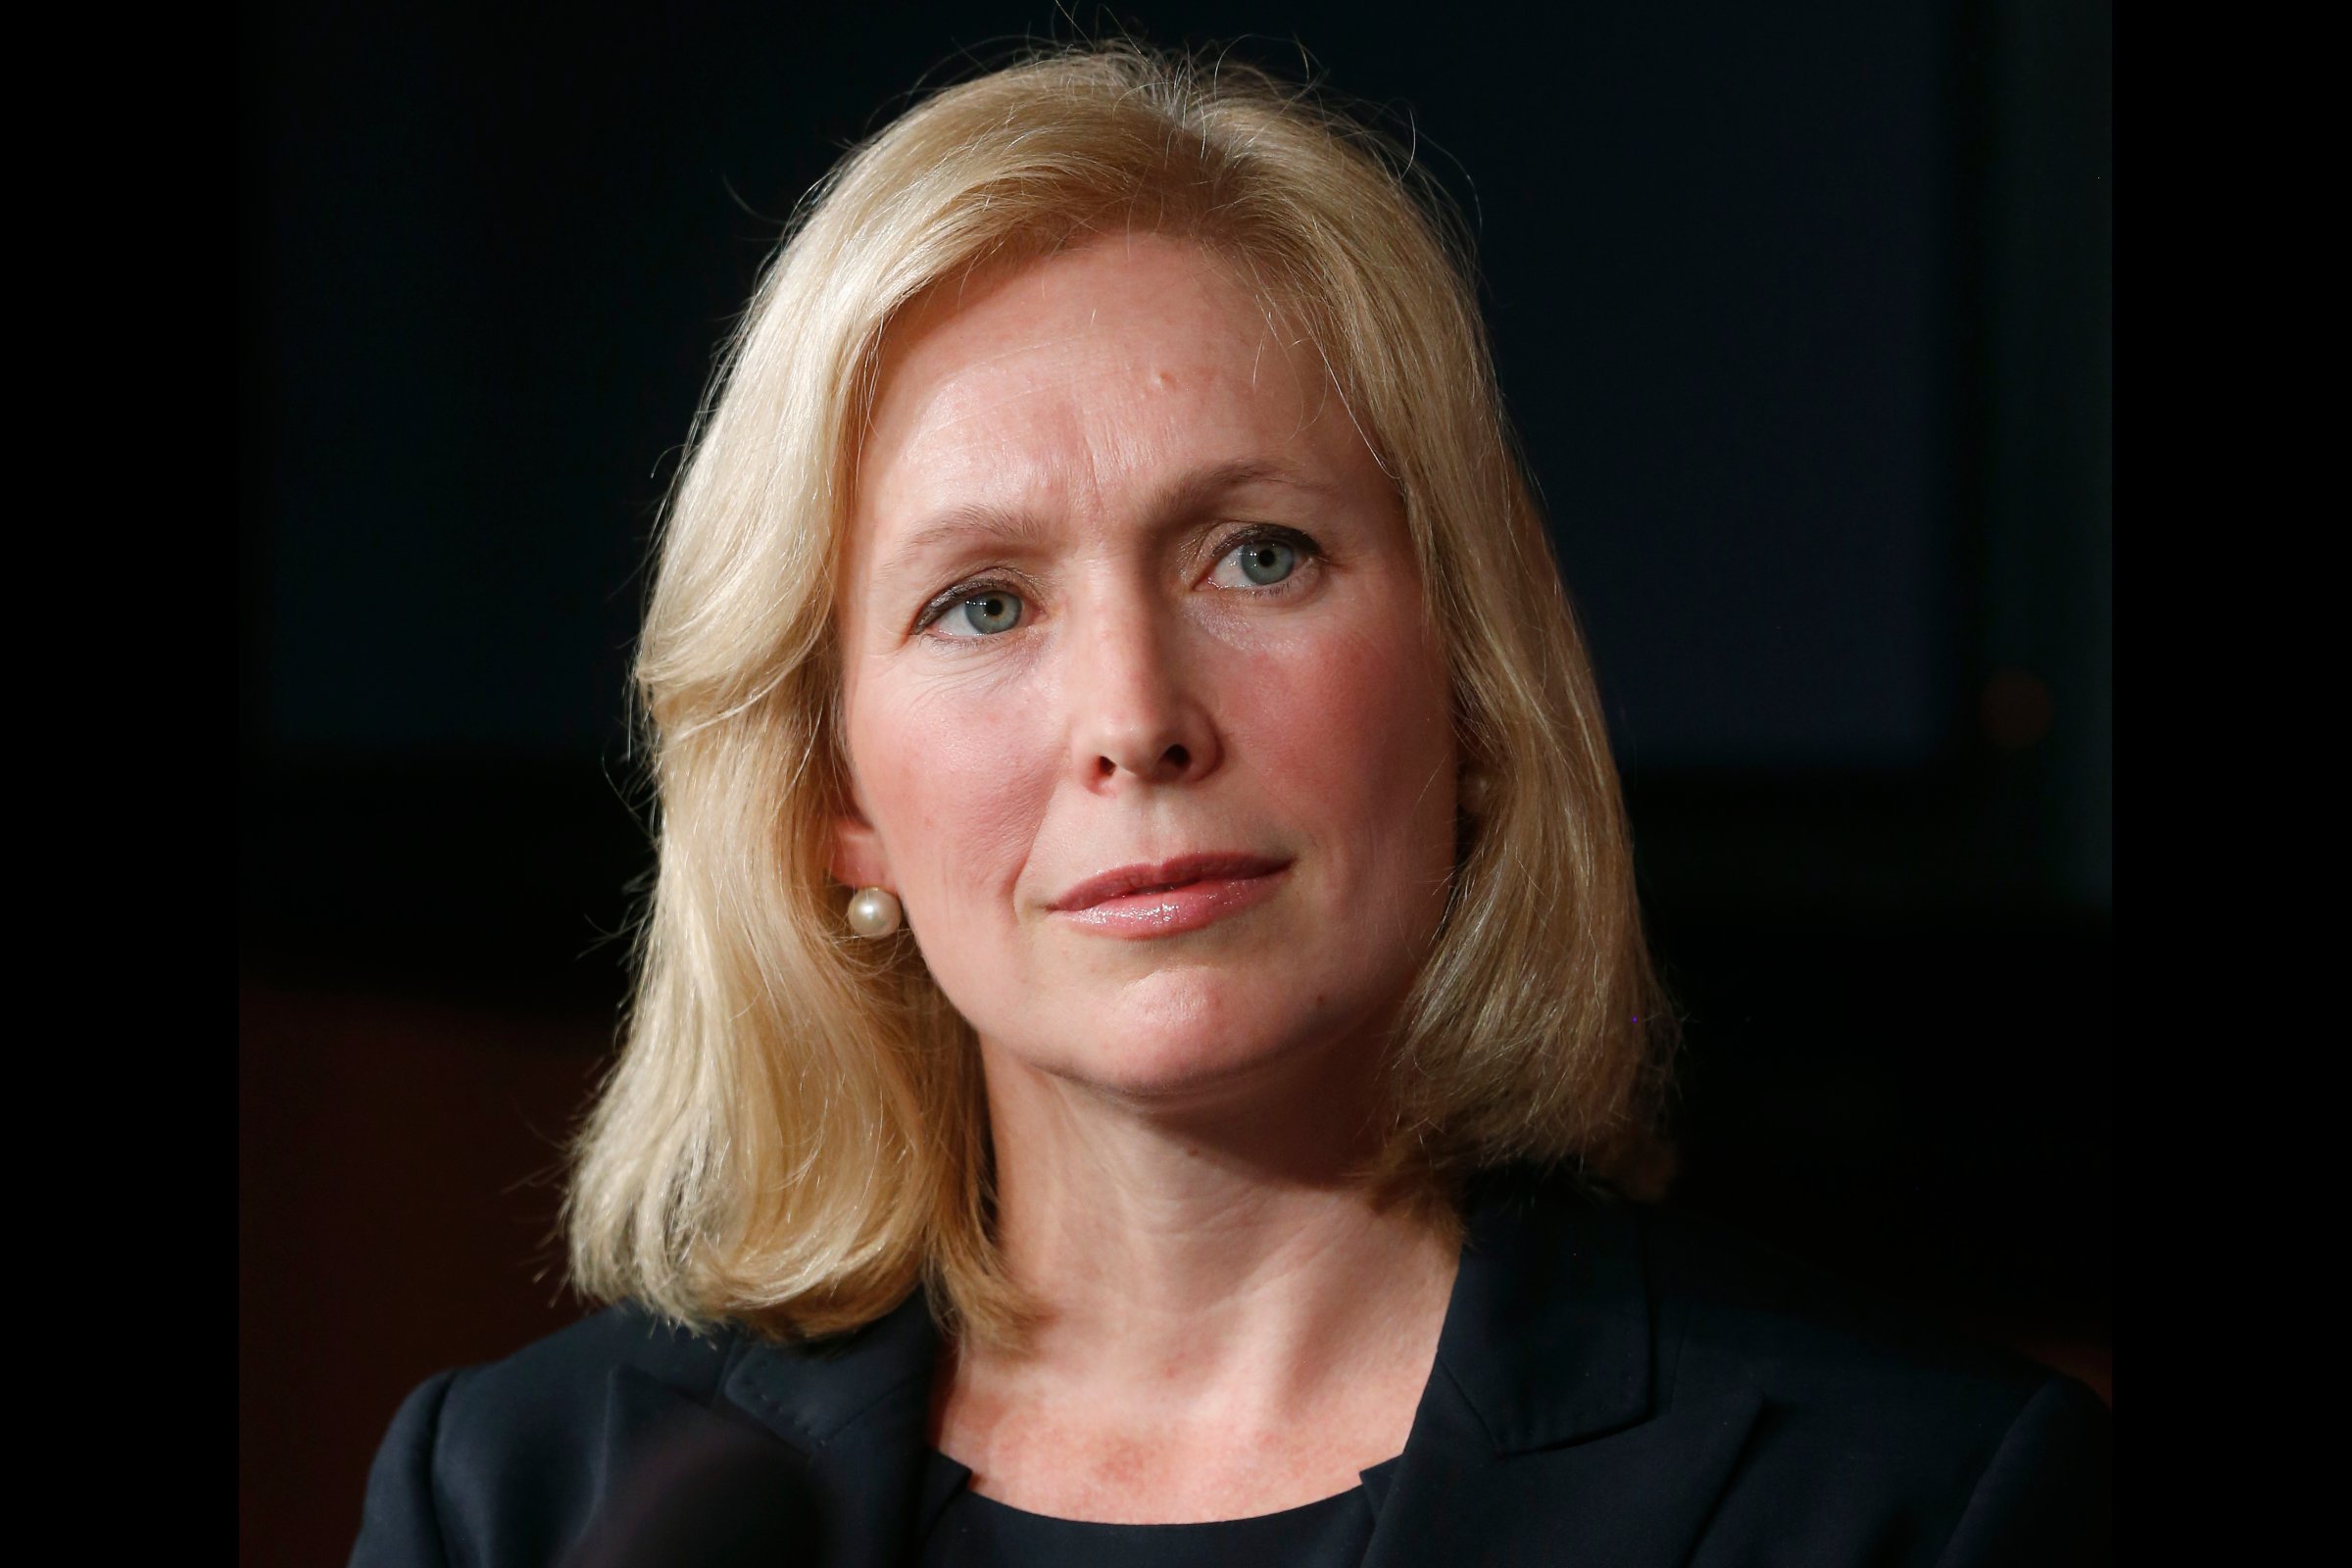 Senator Kirsten Gillibrand at a news conference about a bill regarding military sexual assault cases on Capitol Hill in Washington on July 16, 2013.